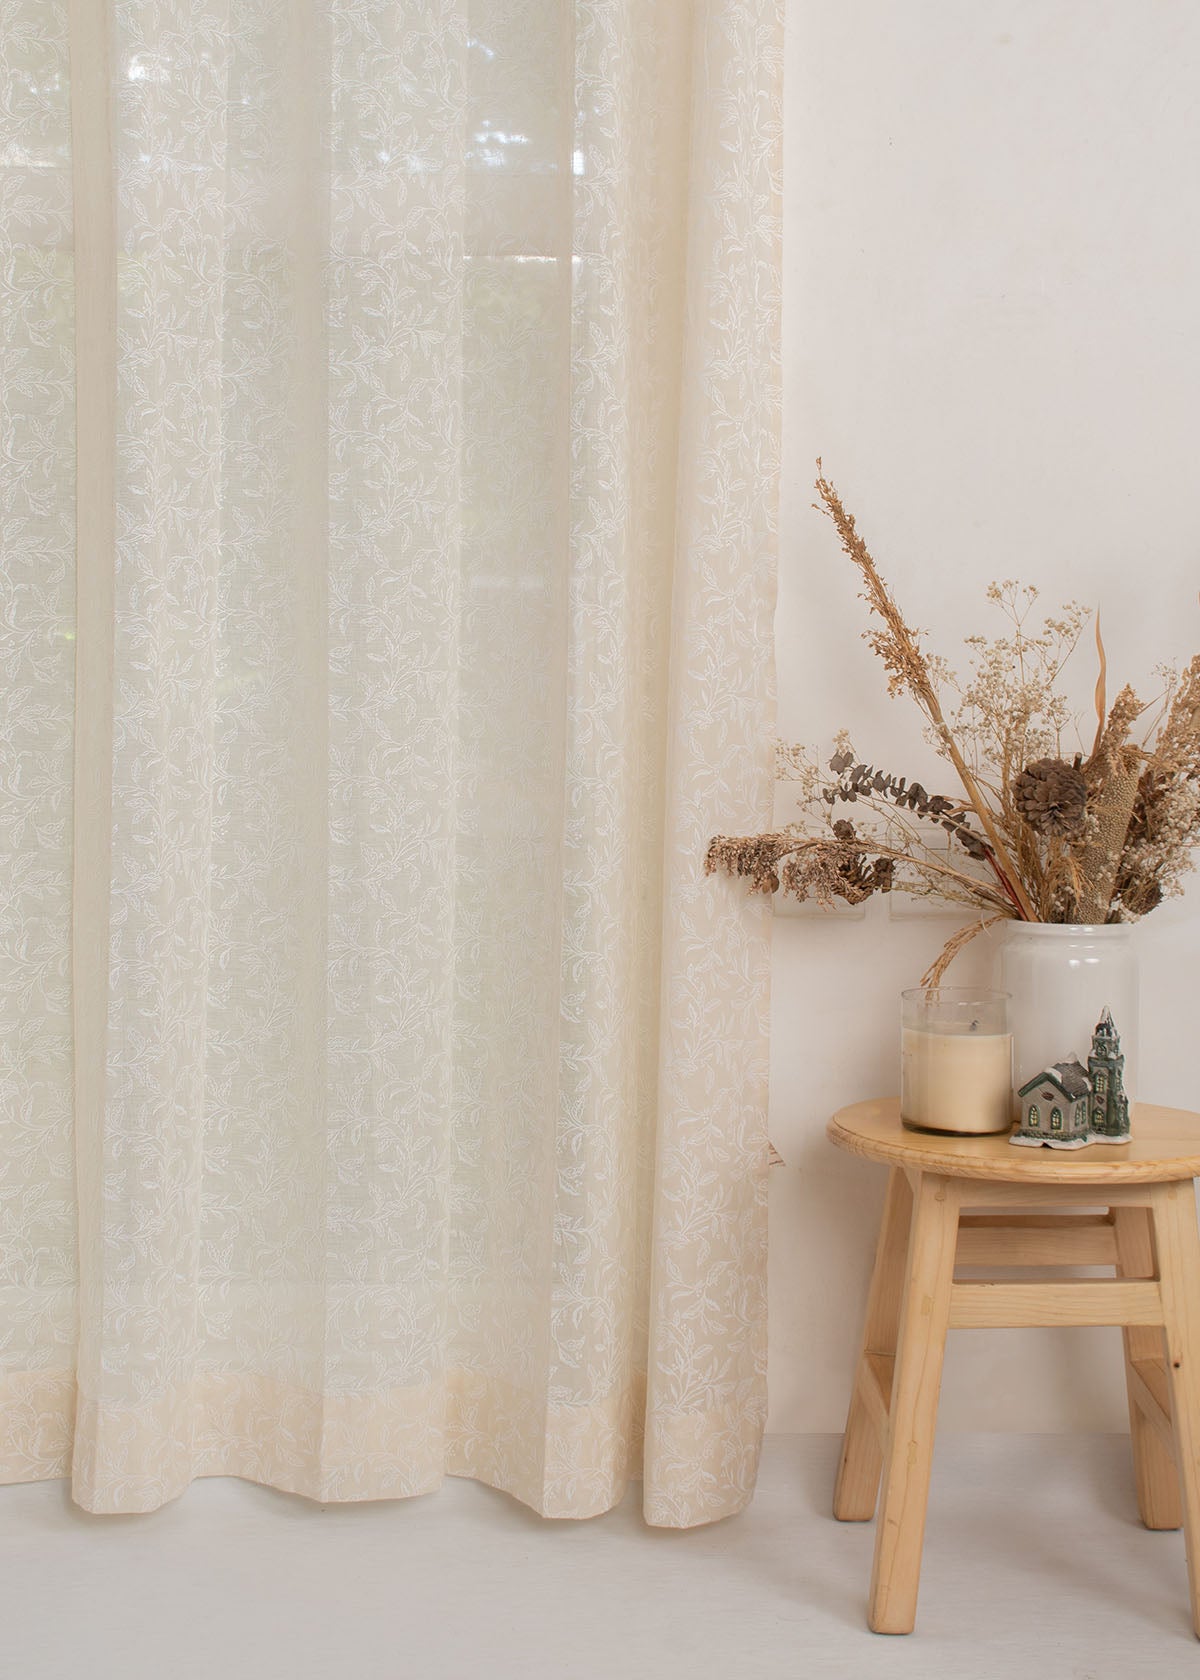 Trailing Berries Printed Sheer Curtain - Off White